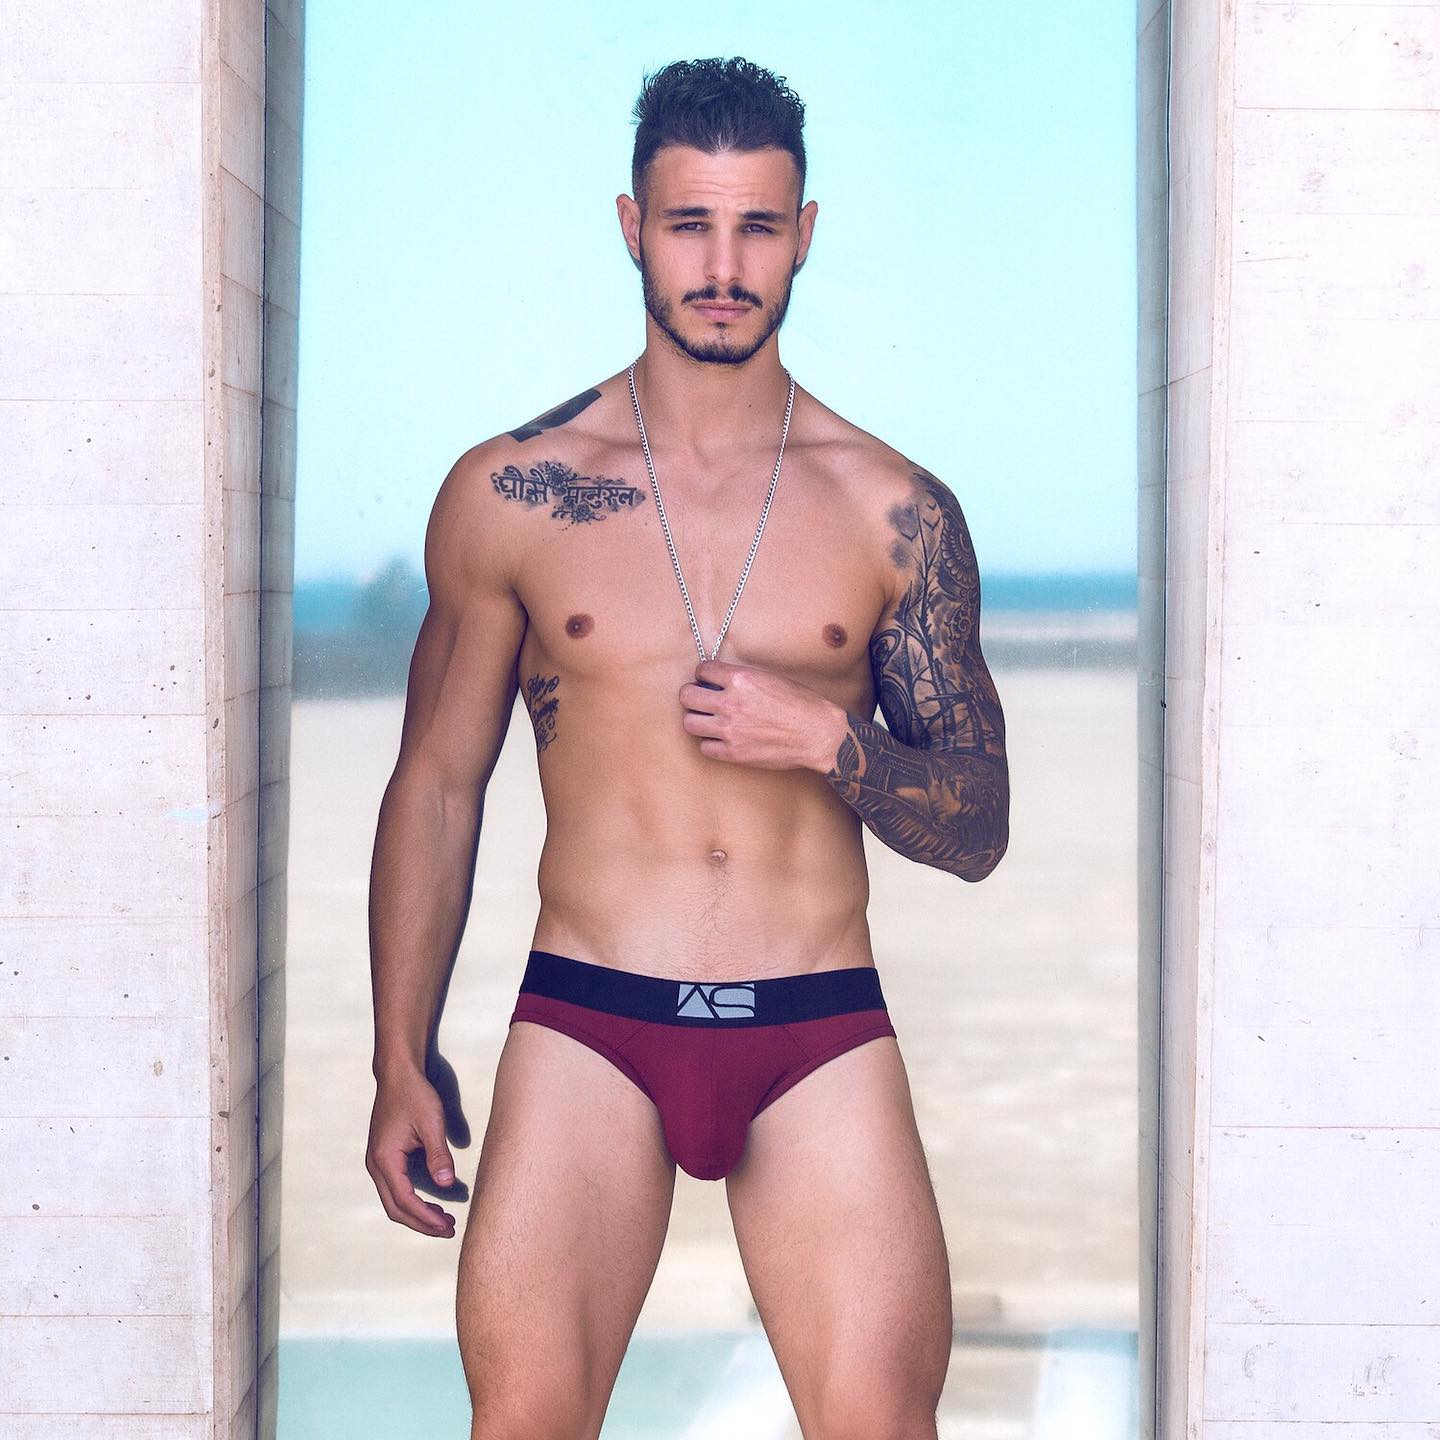 The Shaped Pouch Briefs from Adam Smith feature narrow sides for easier movement while walking or exercising, a seamless back for a frictionless feel and a contoured pouch for space and gentle support for your package.
____
https://menandunderwear.com/shop/underwear/adam-smith-shaped-pouch-briefs-burgundy